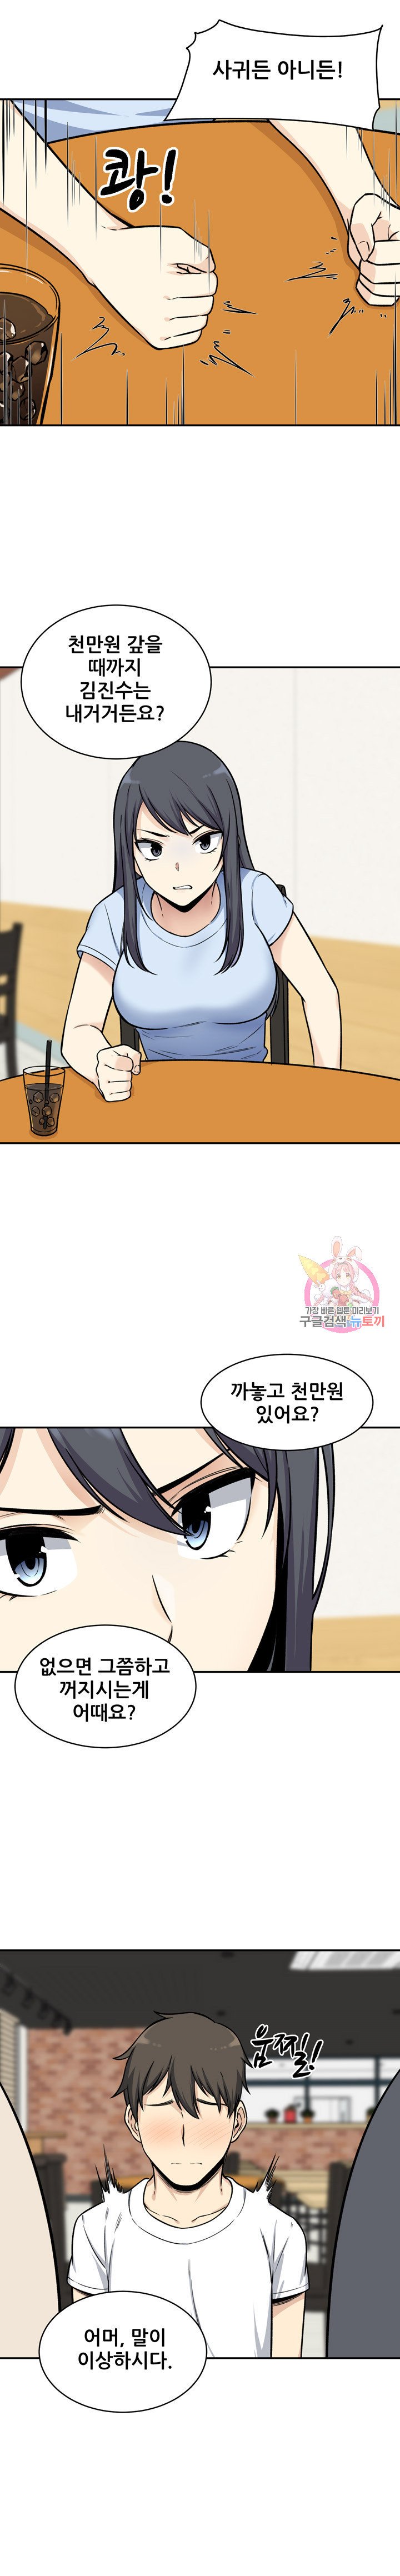 the-ark-is-me-raw-chap-32-13